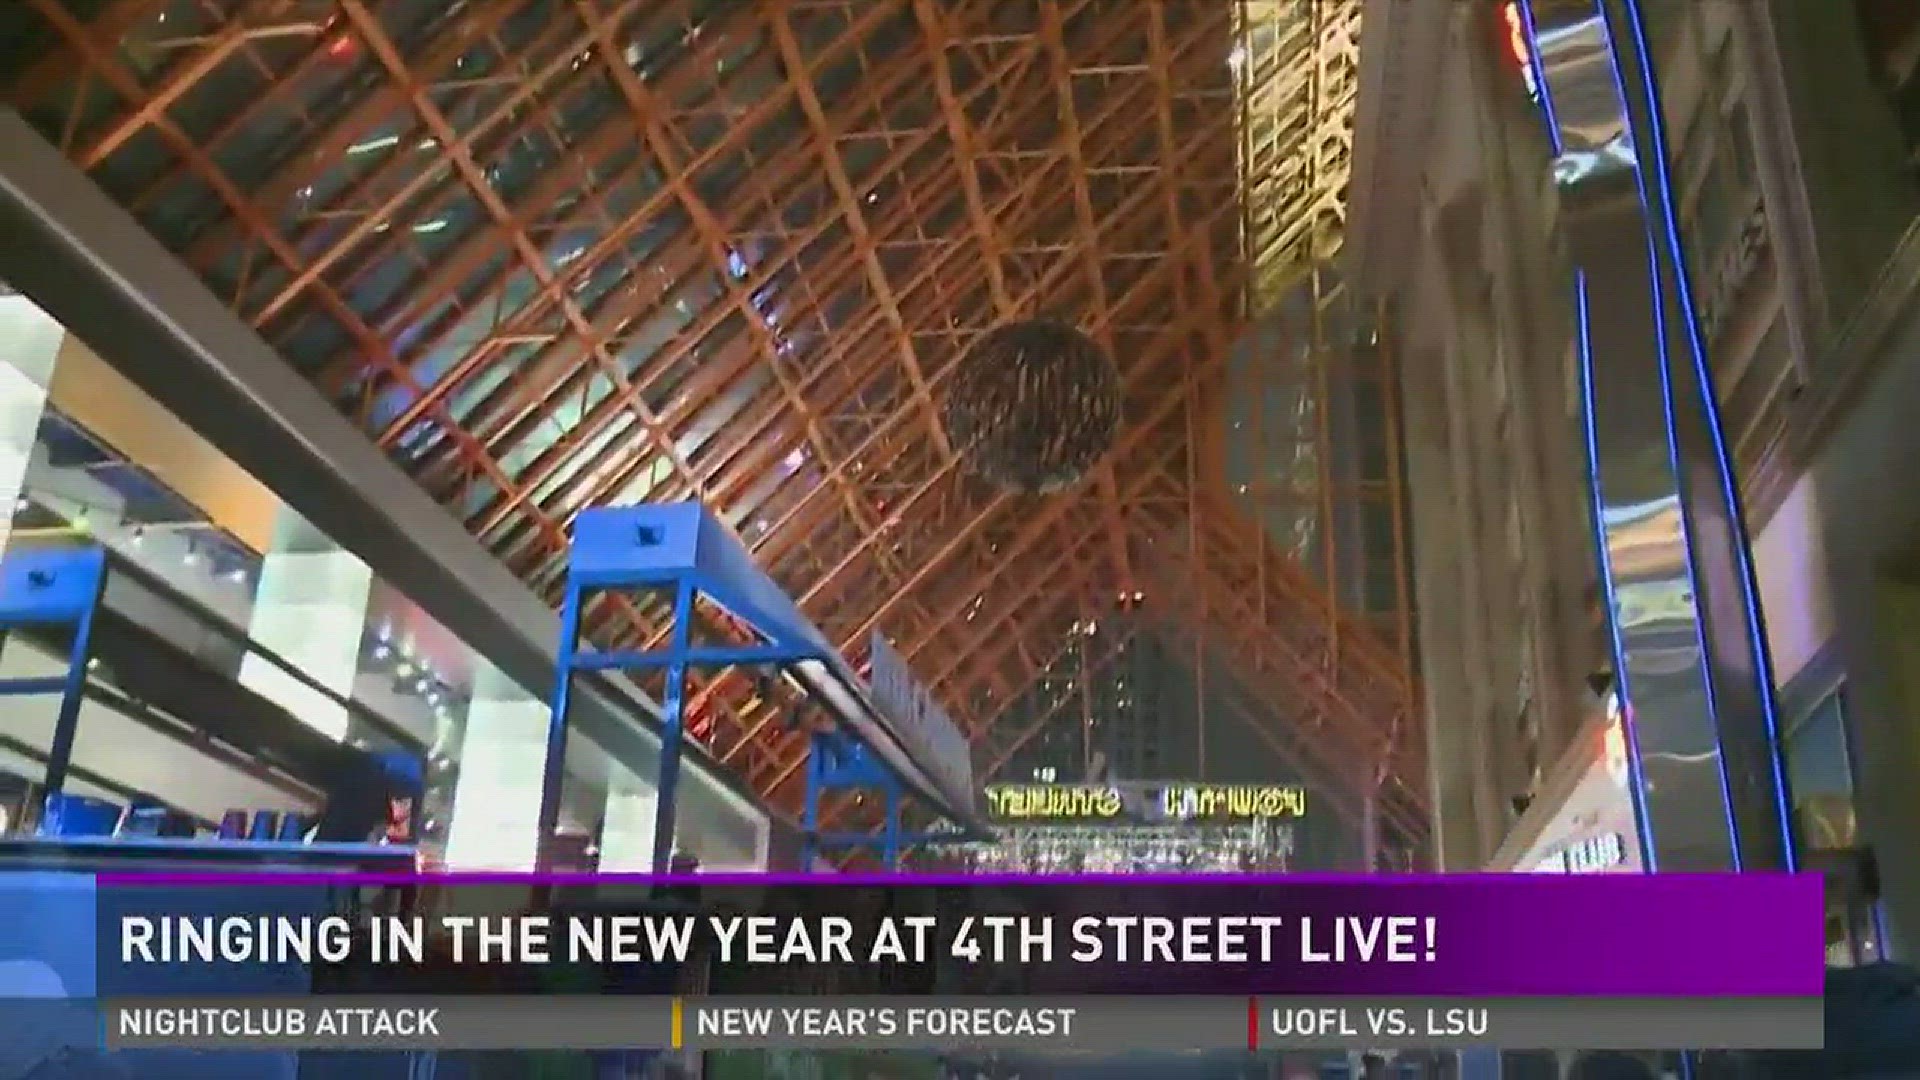 Ringing in the New Year at 4th Street Live!